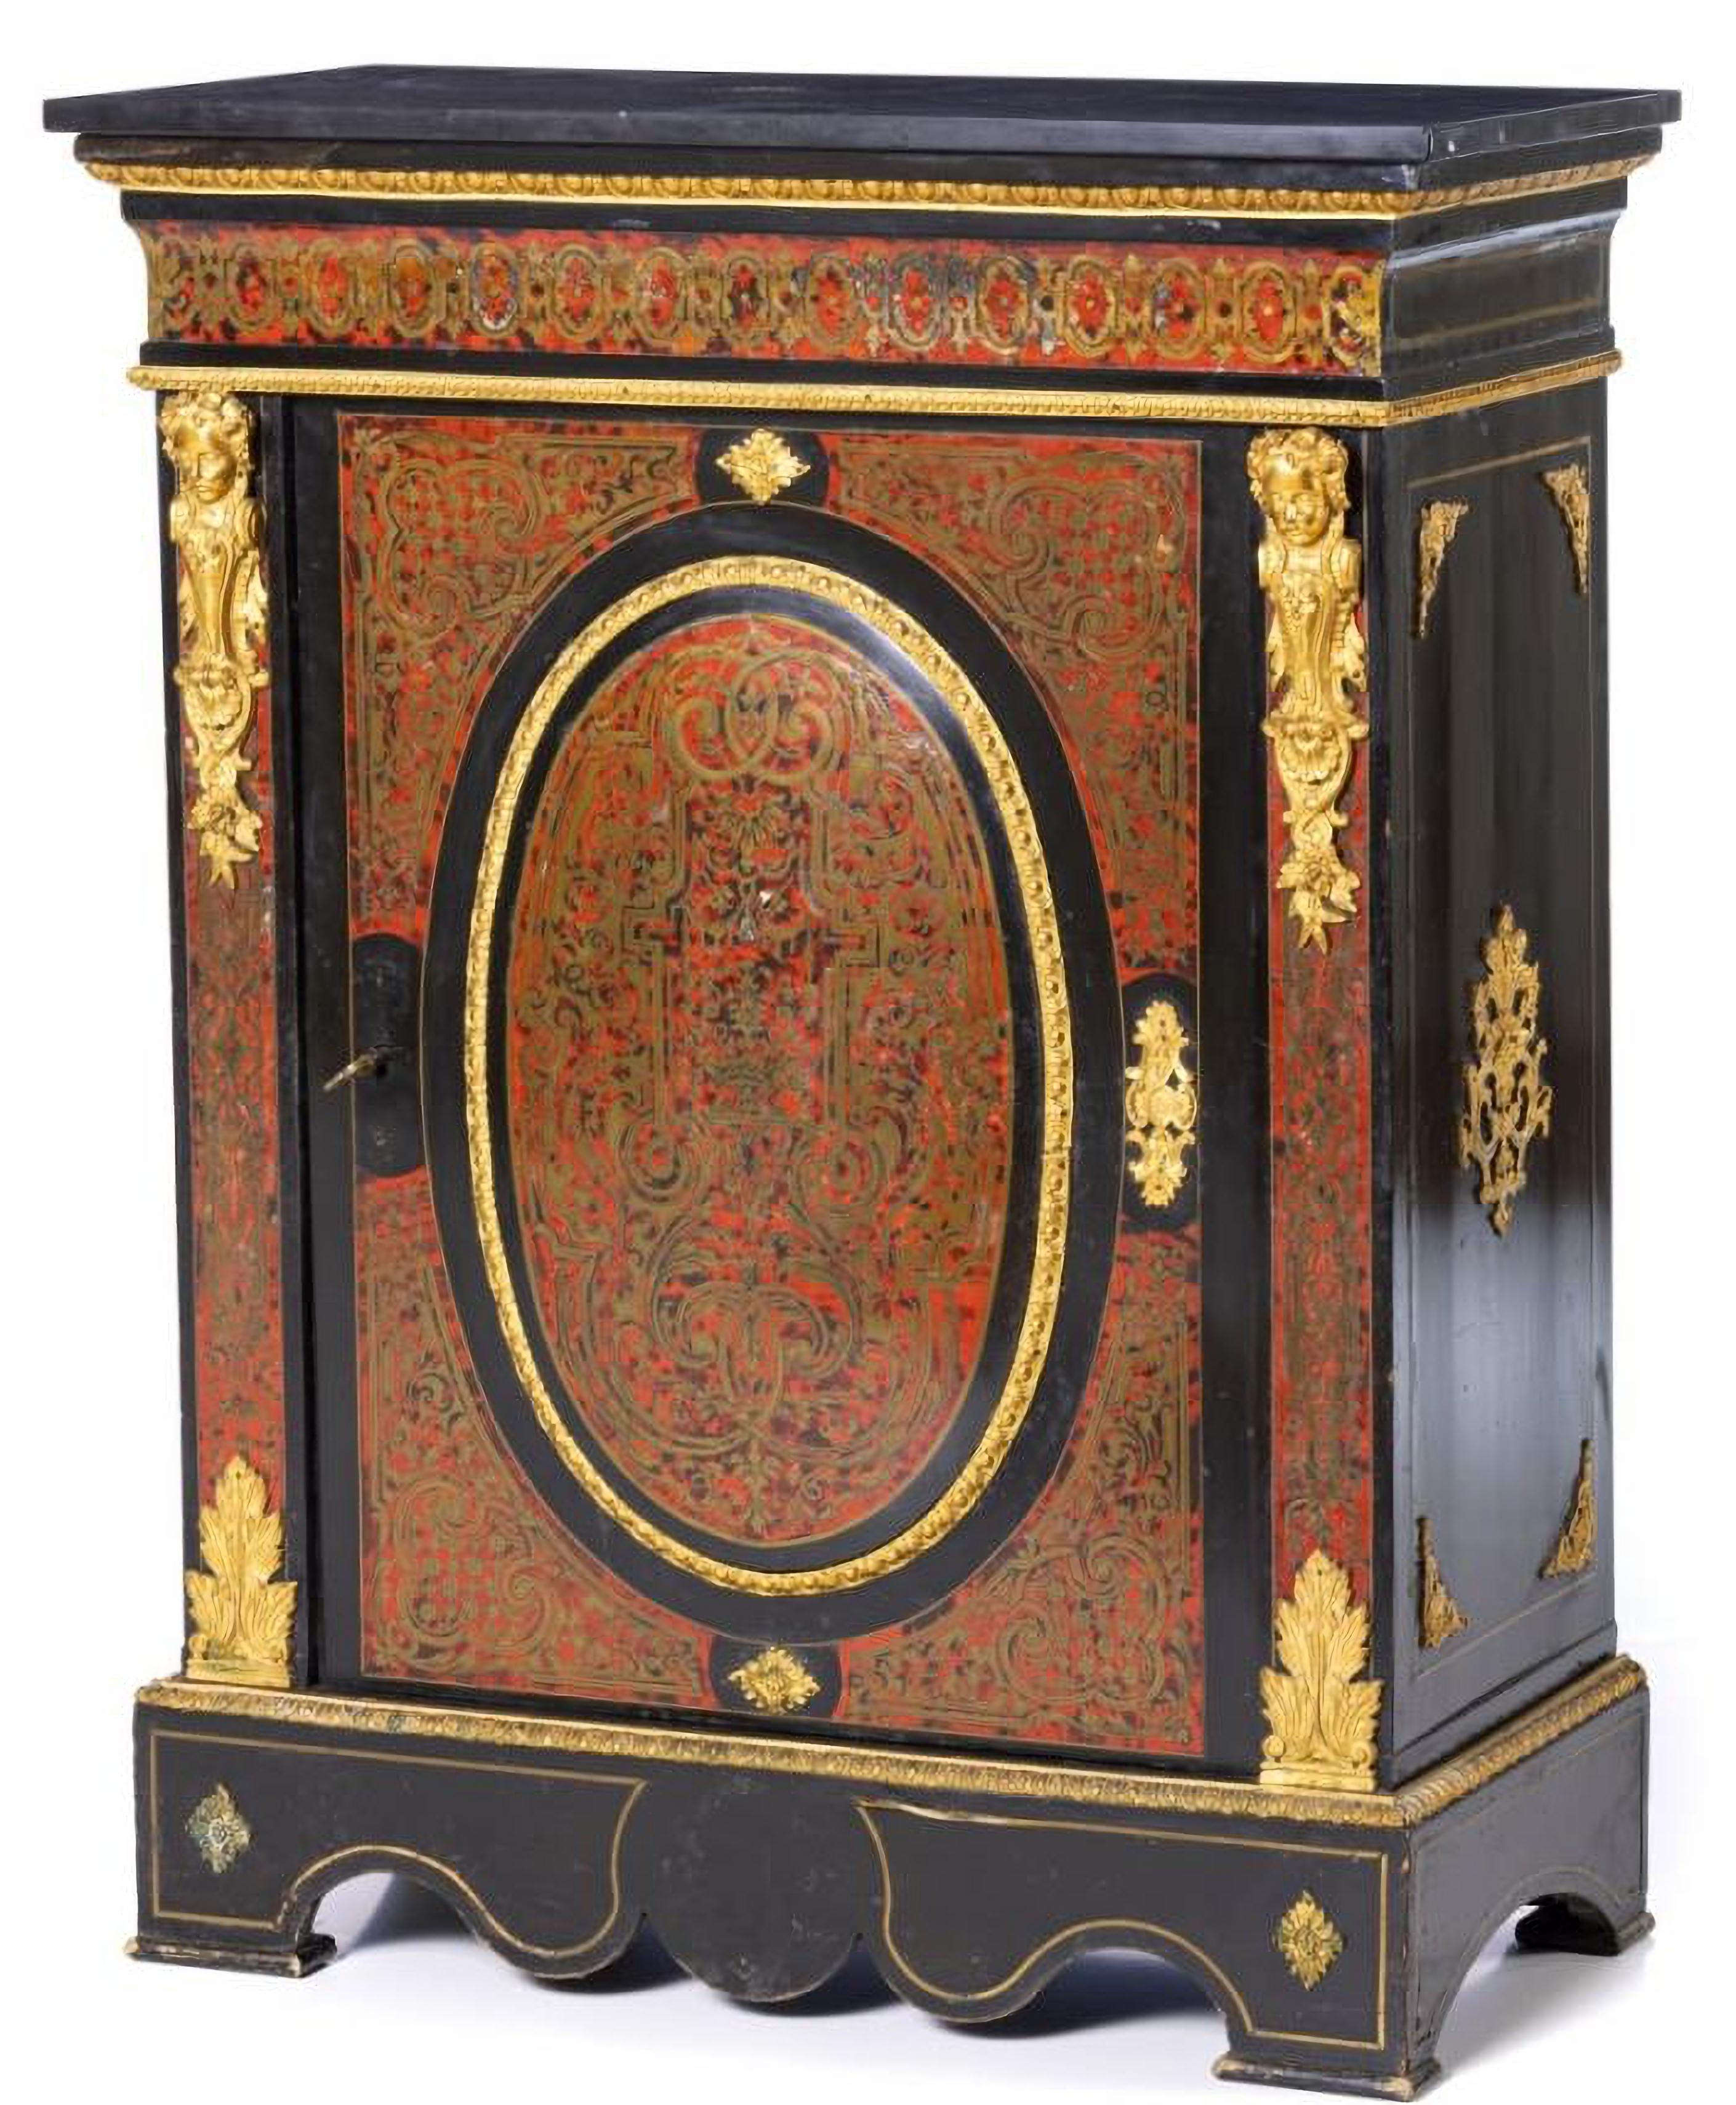 BOULLE CABINET
19th Century French Napoleon III,
Marquetry in ebonized wood, tortoiseshell and brass. Gilded bronze applications 